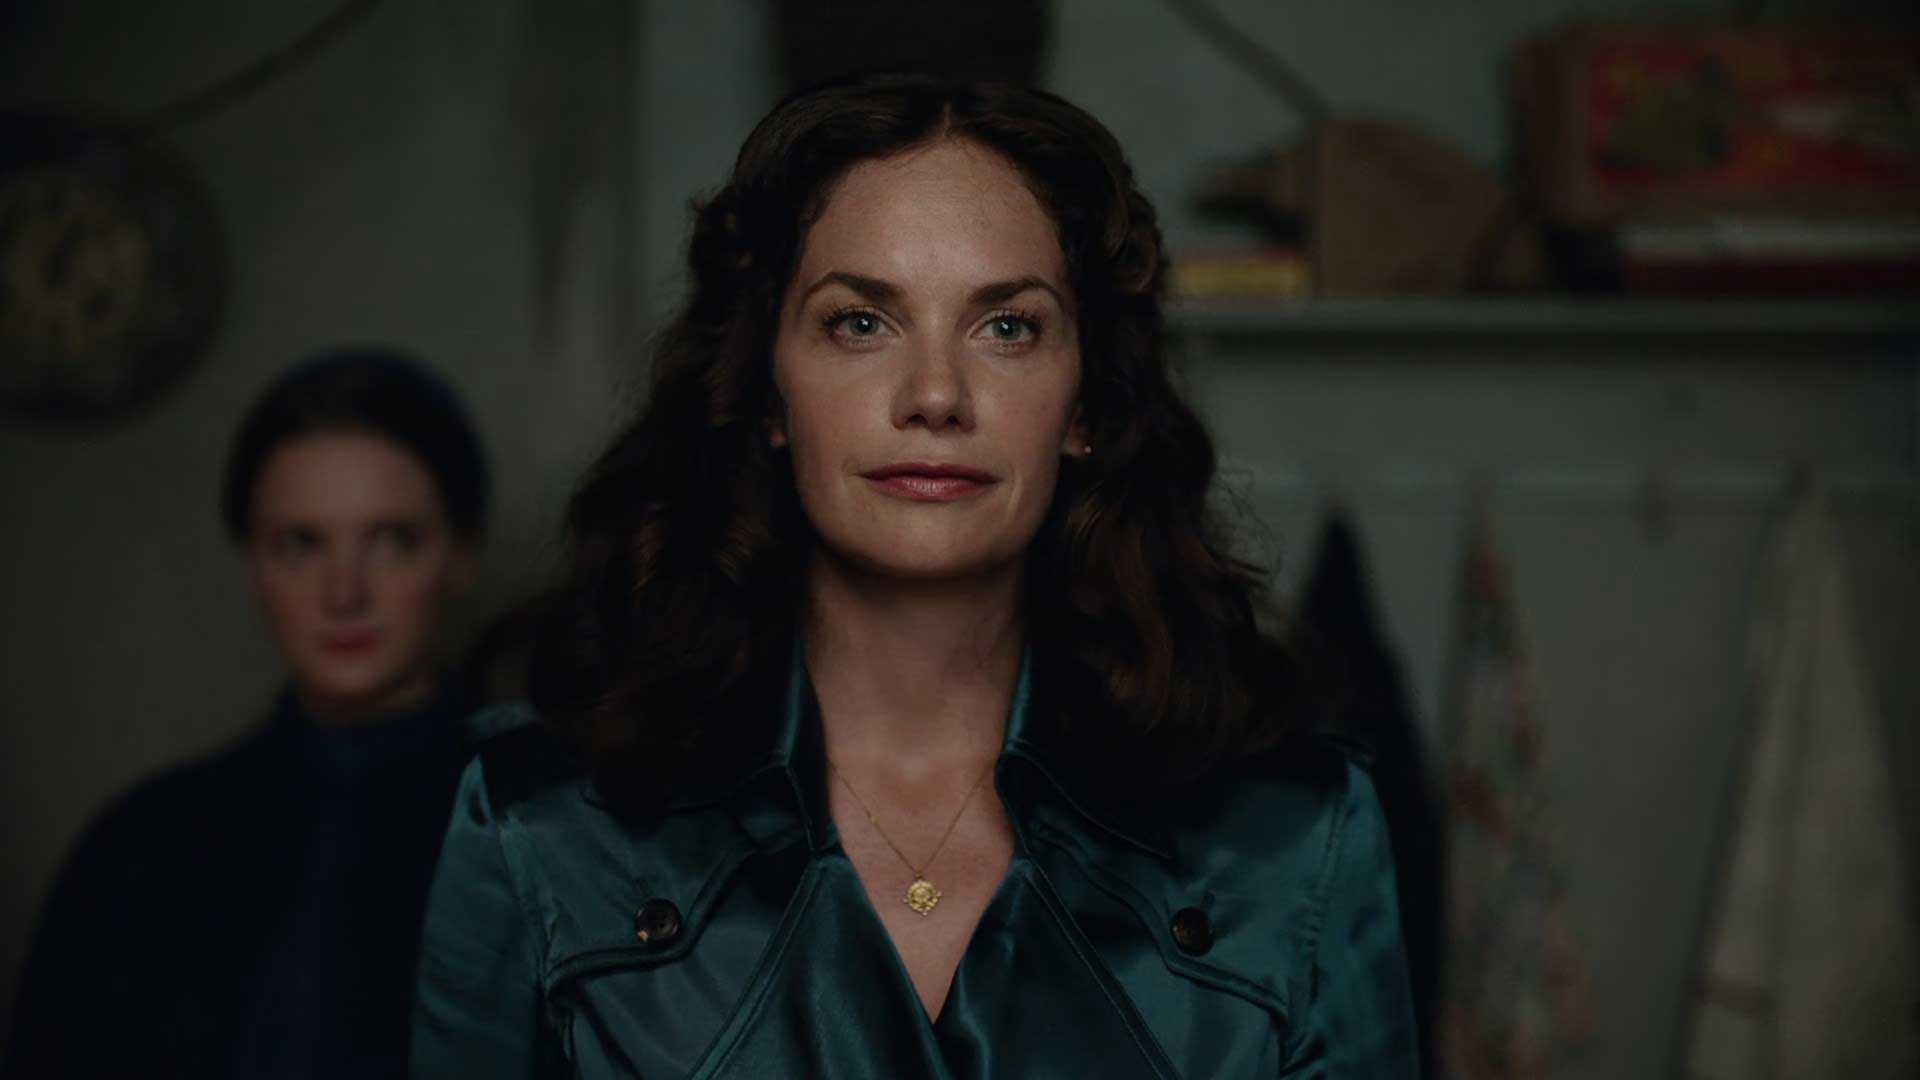 His Dark Materials S01E02 - Ruth Wilson Mrs Coulter